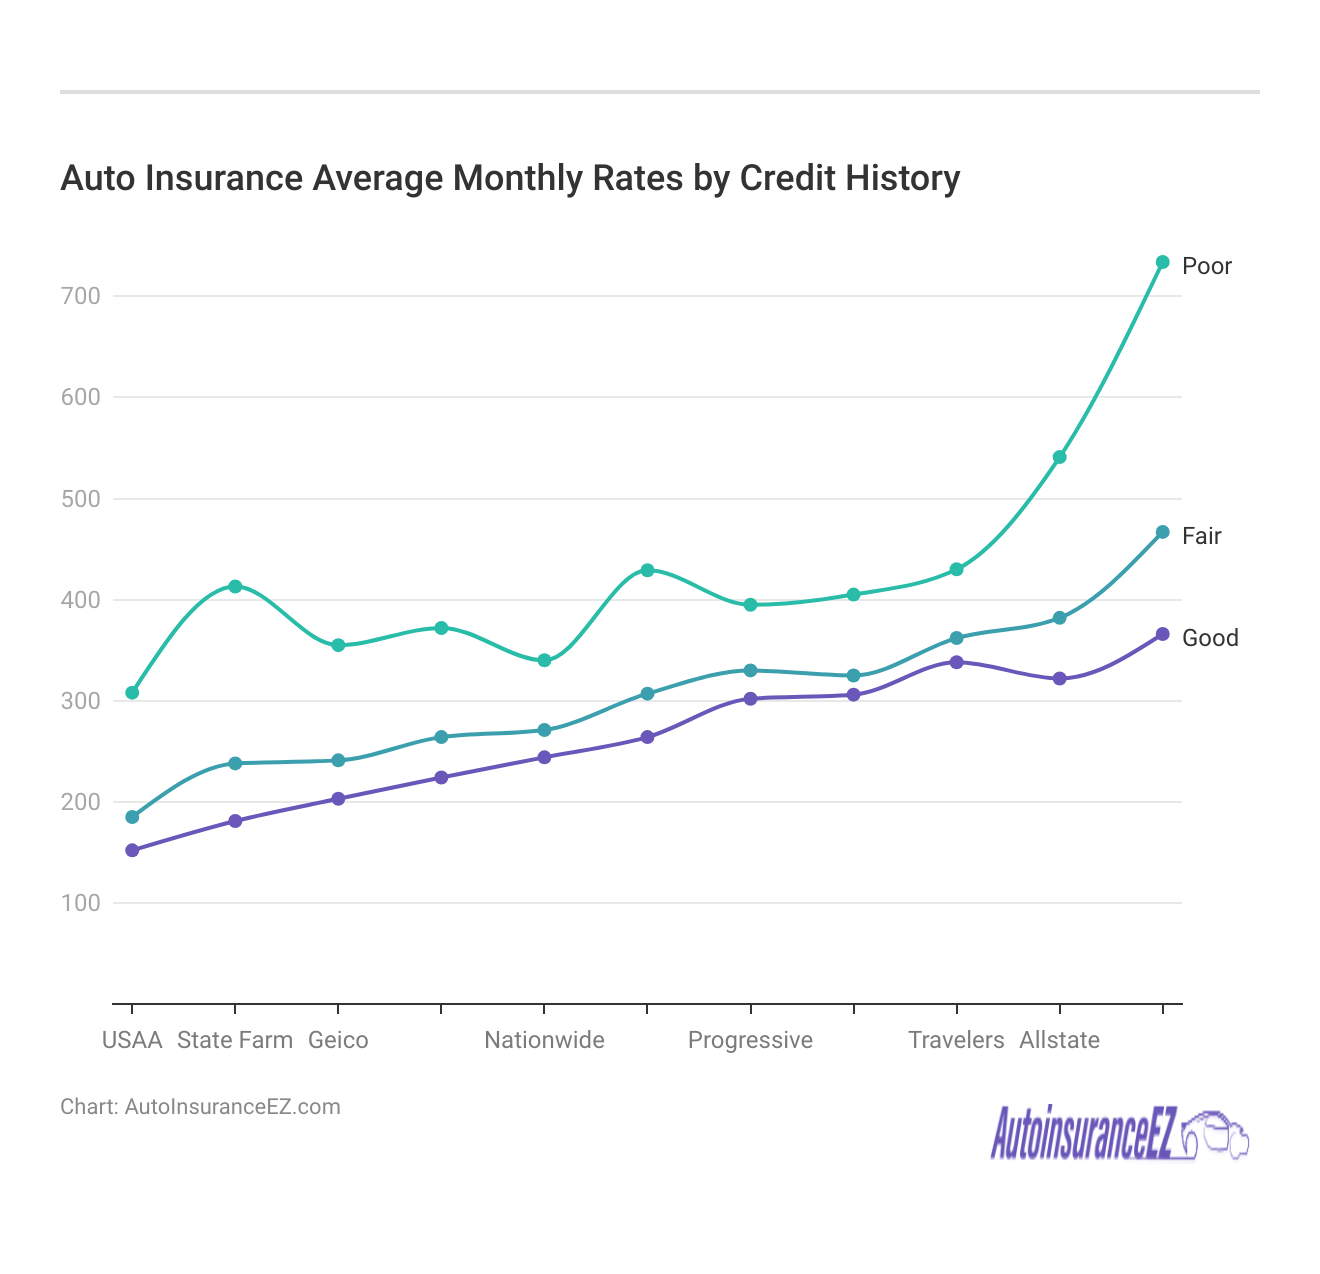 <h3>Auto Insurance Average Monthly Rates by Credit History</h3>